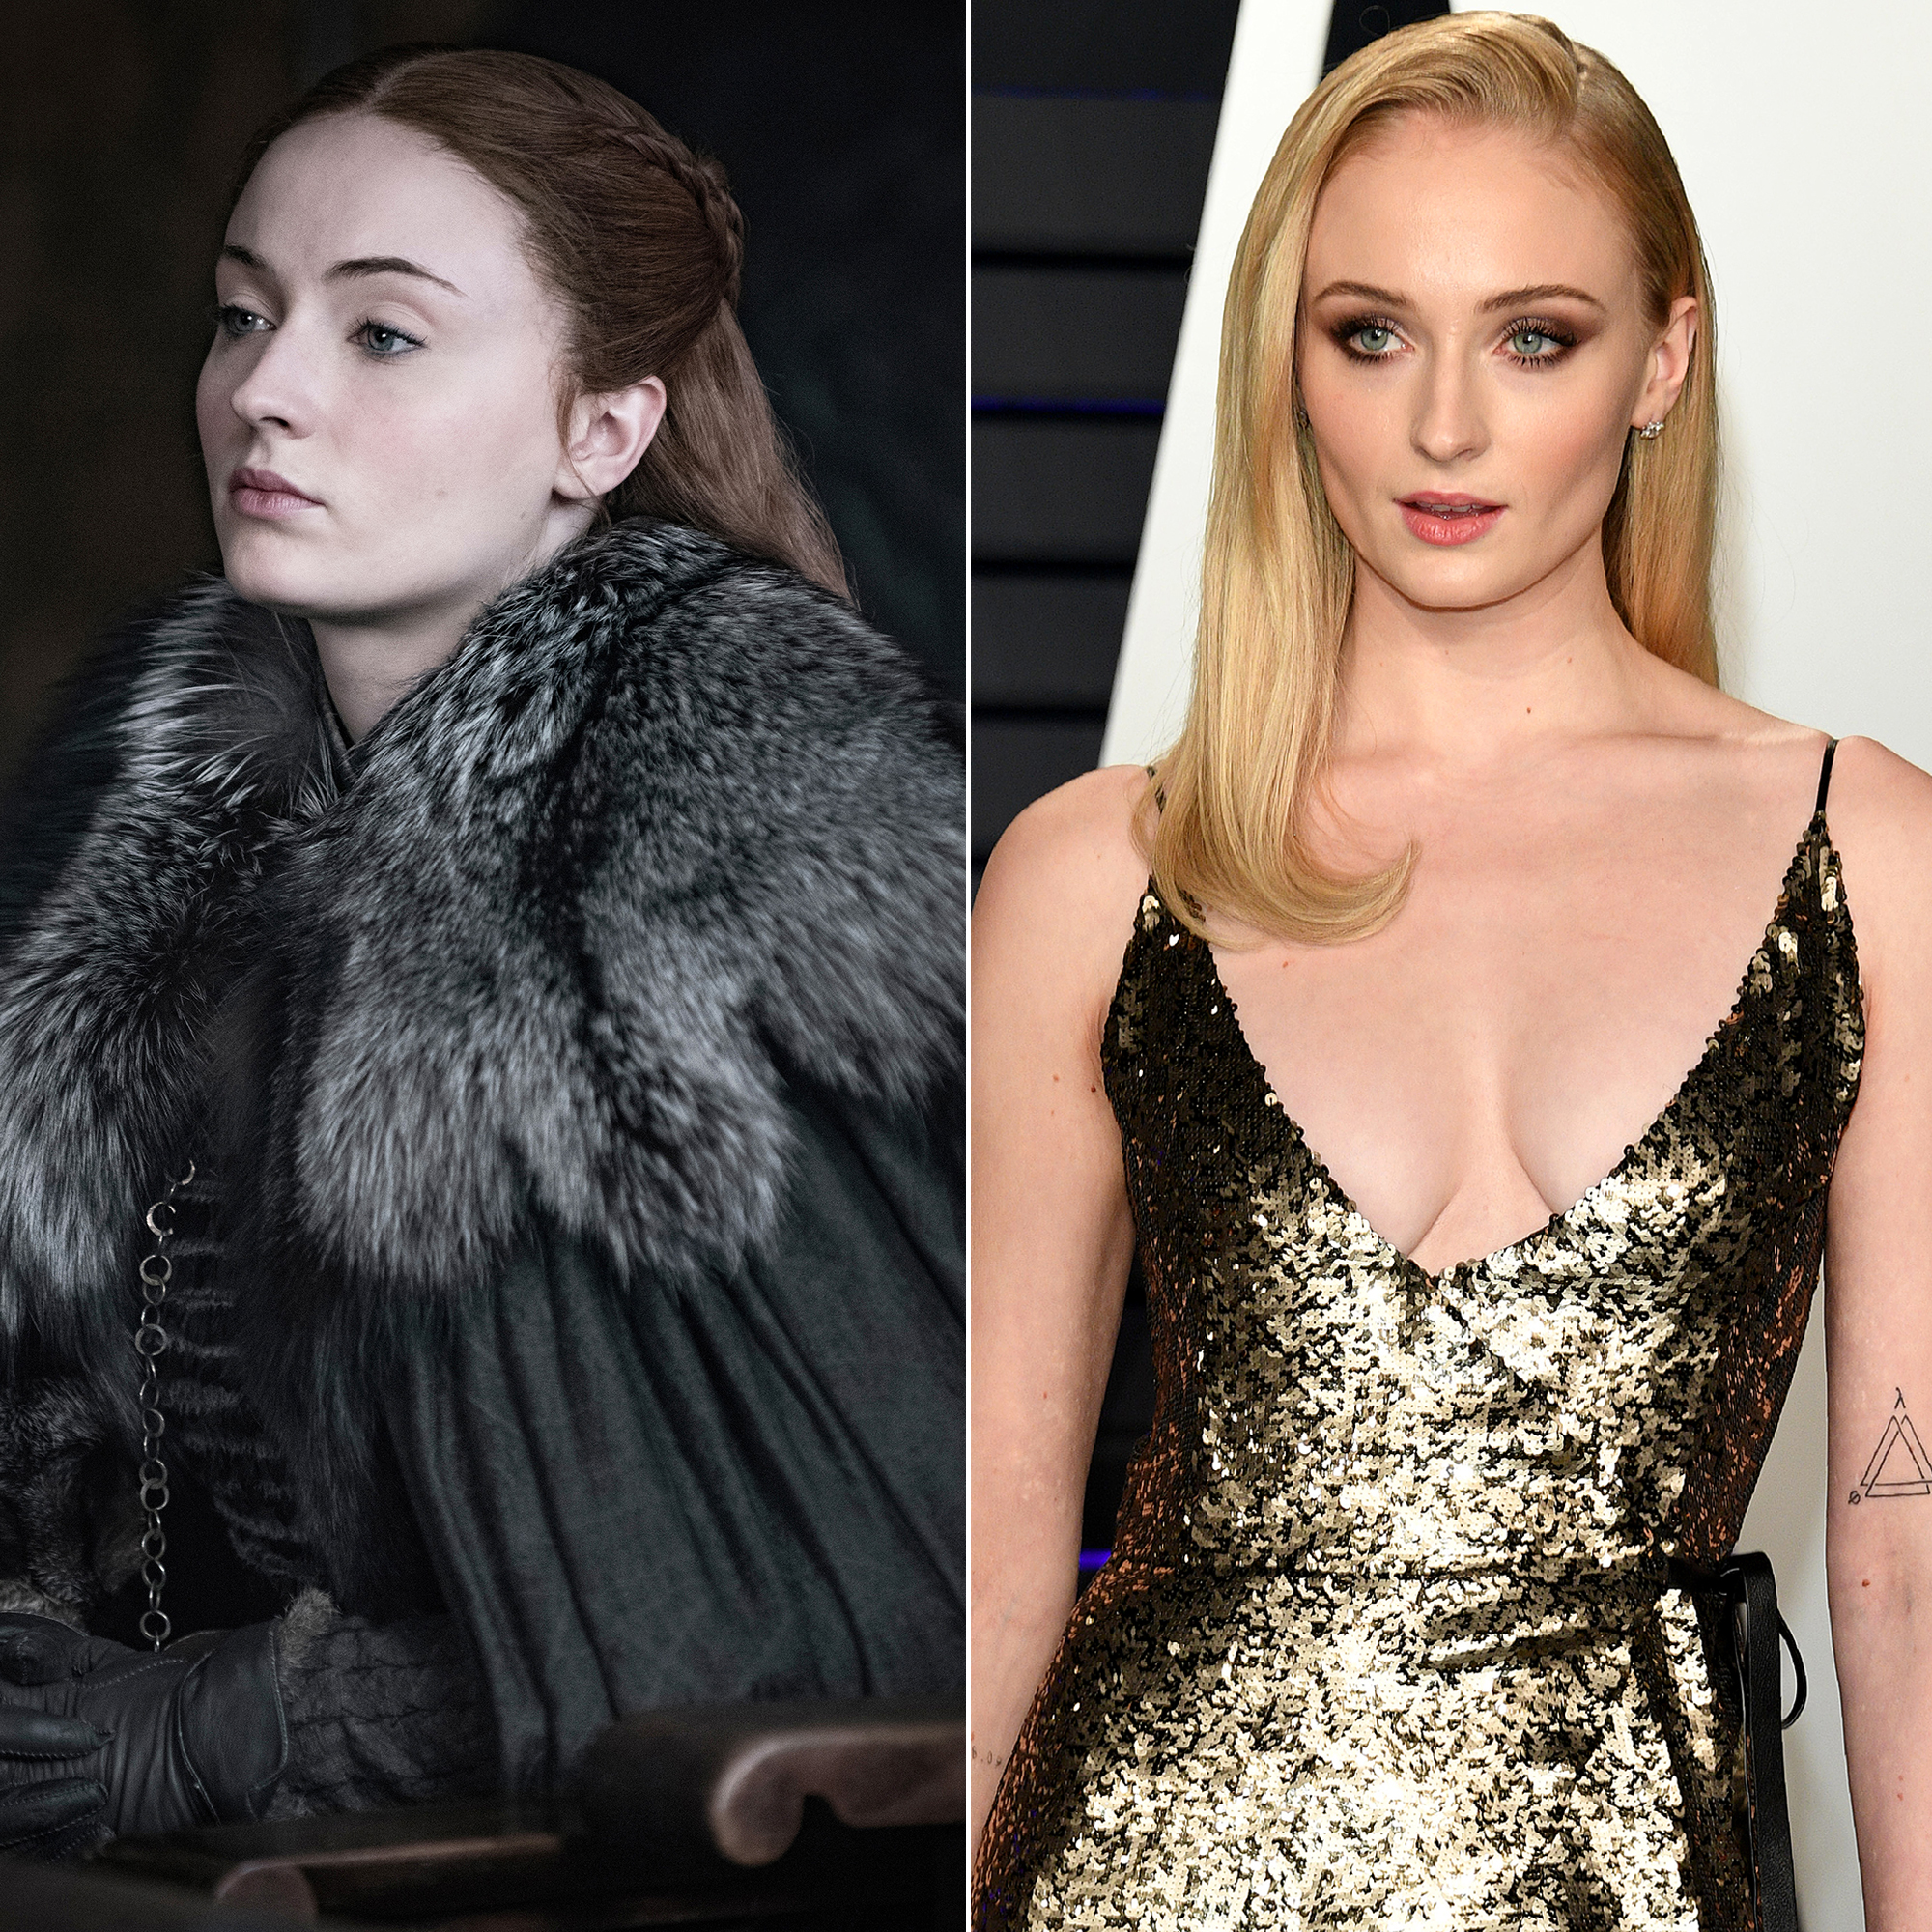 What These Game of Thrones Actors Look Like in Real Life (Gallery